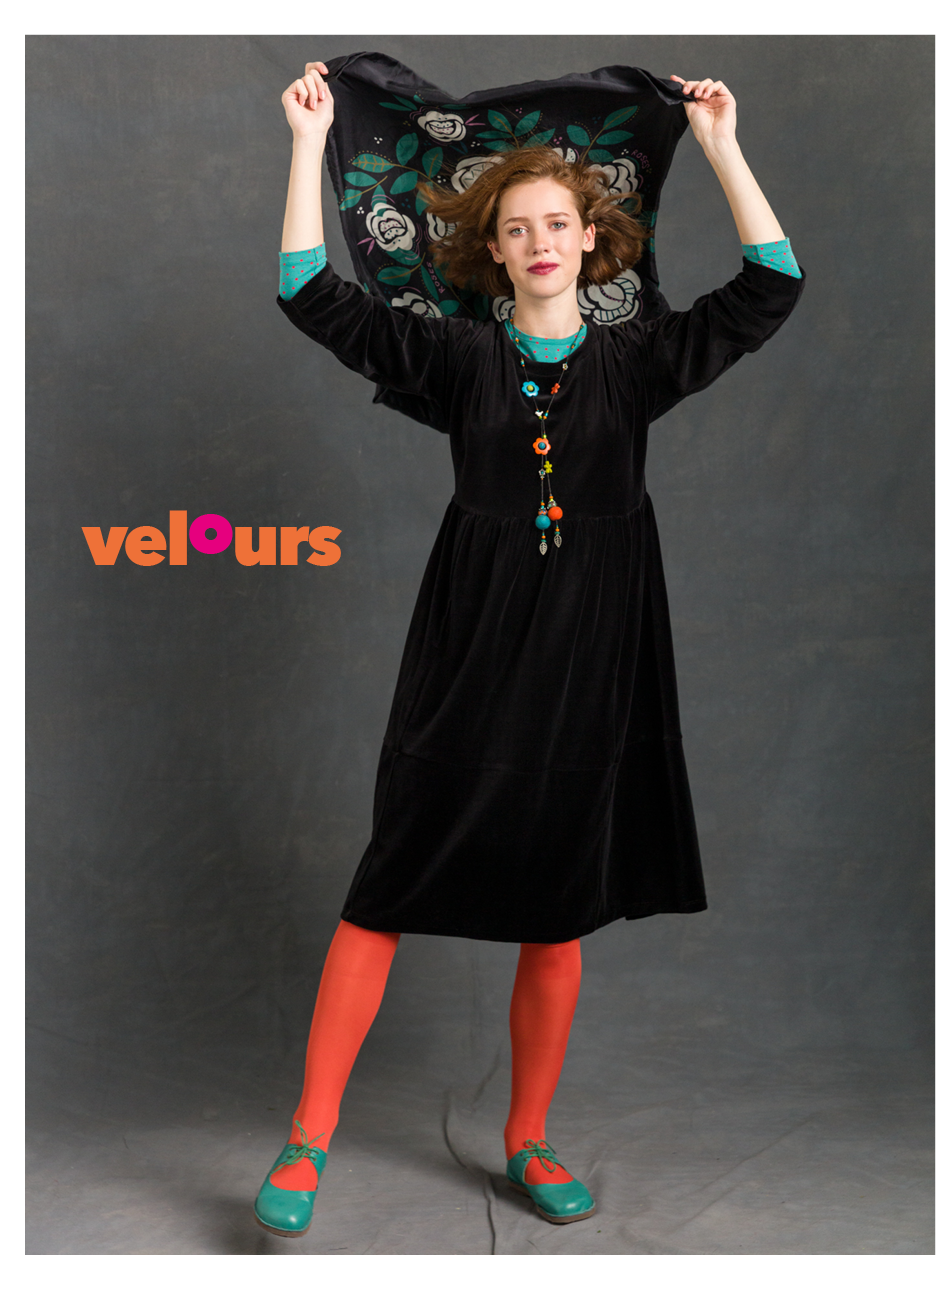 Velour dress in organic cotton/recycled polyester